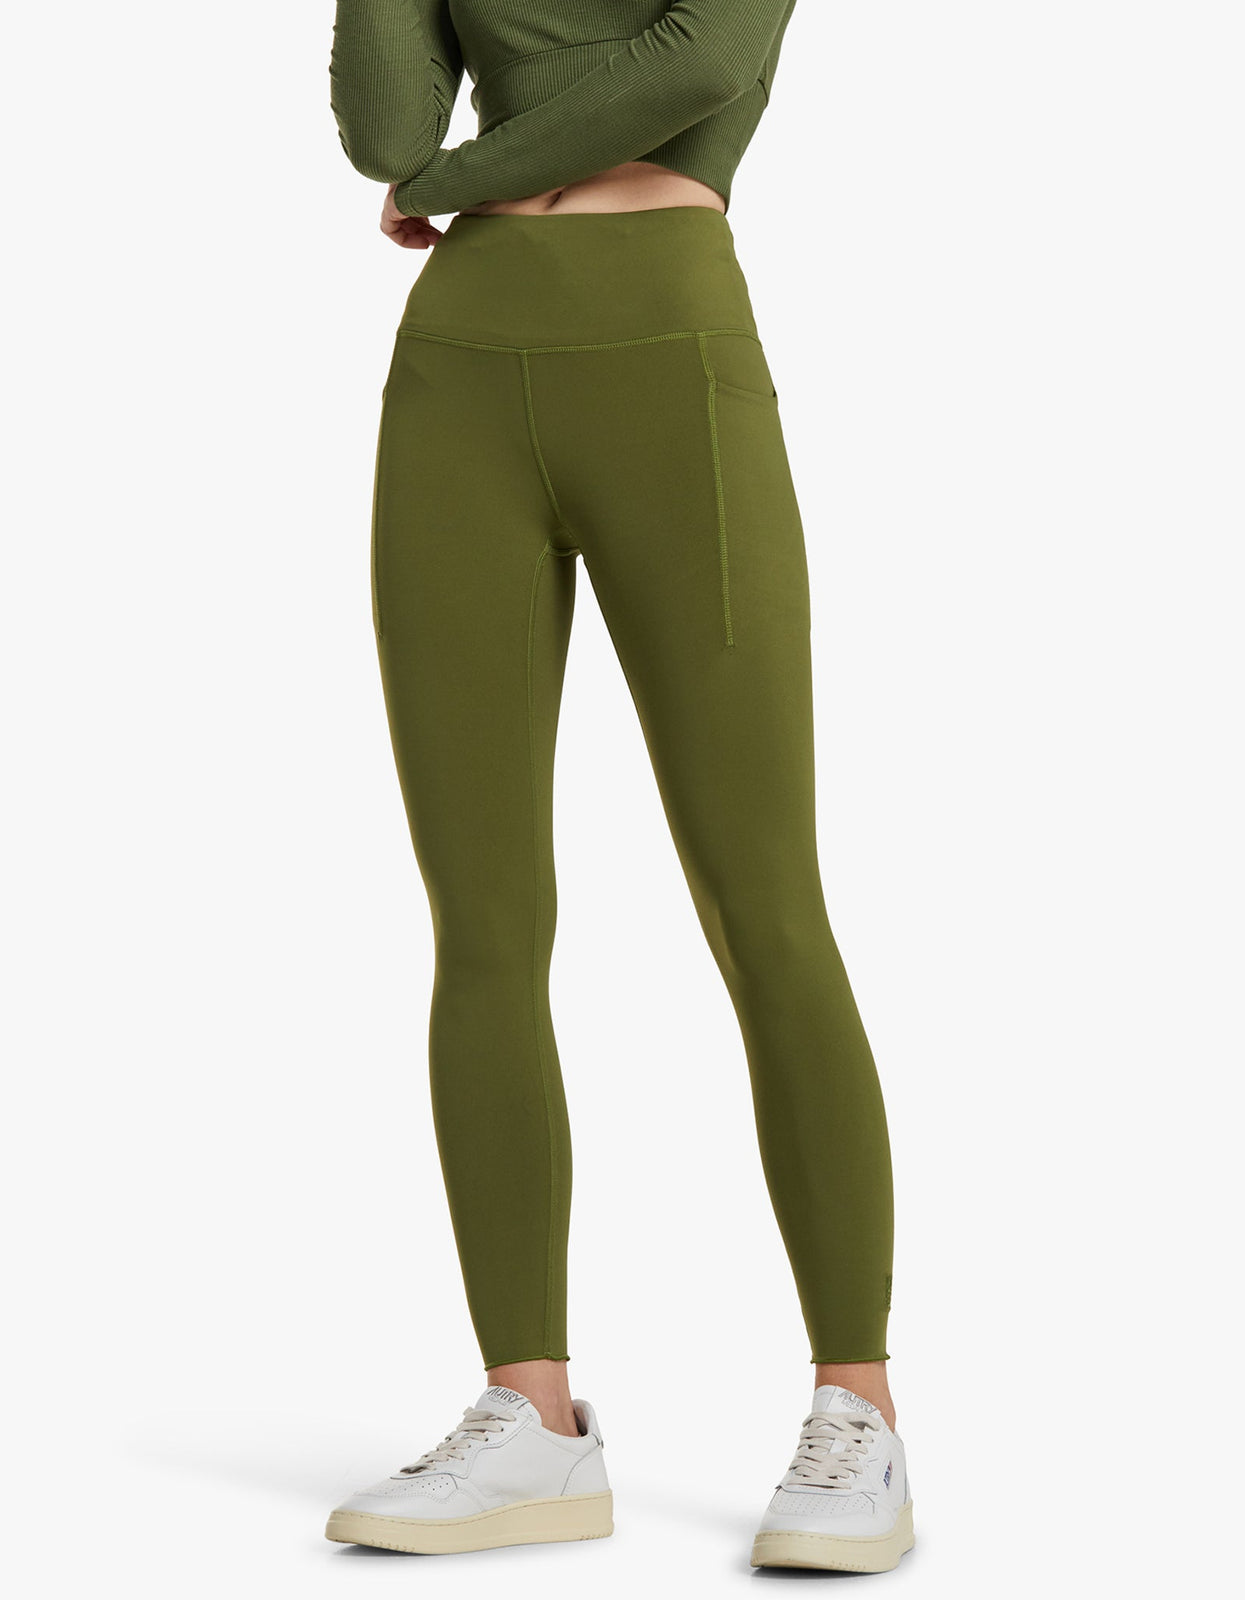 Aerie Leggings For Women  International Society of Precision Agriculture